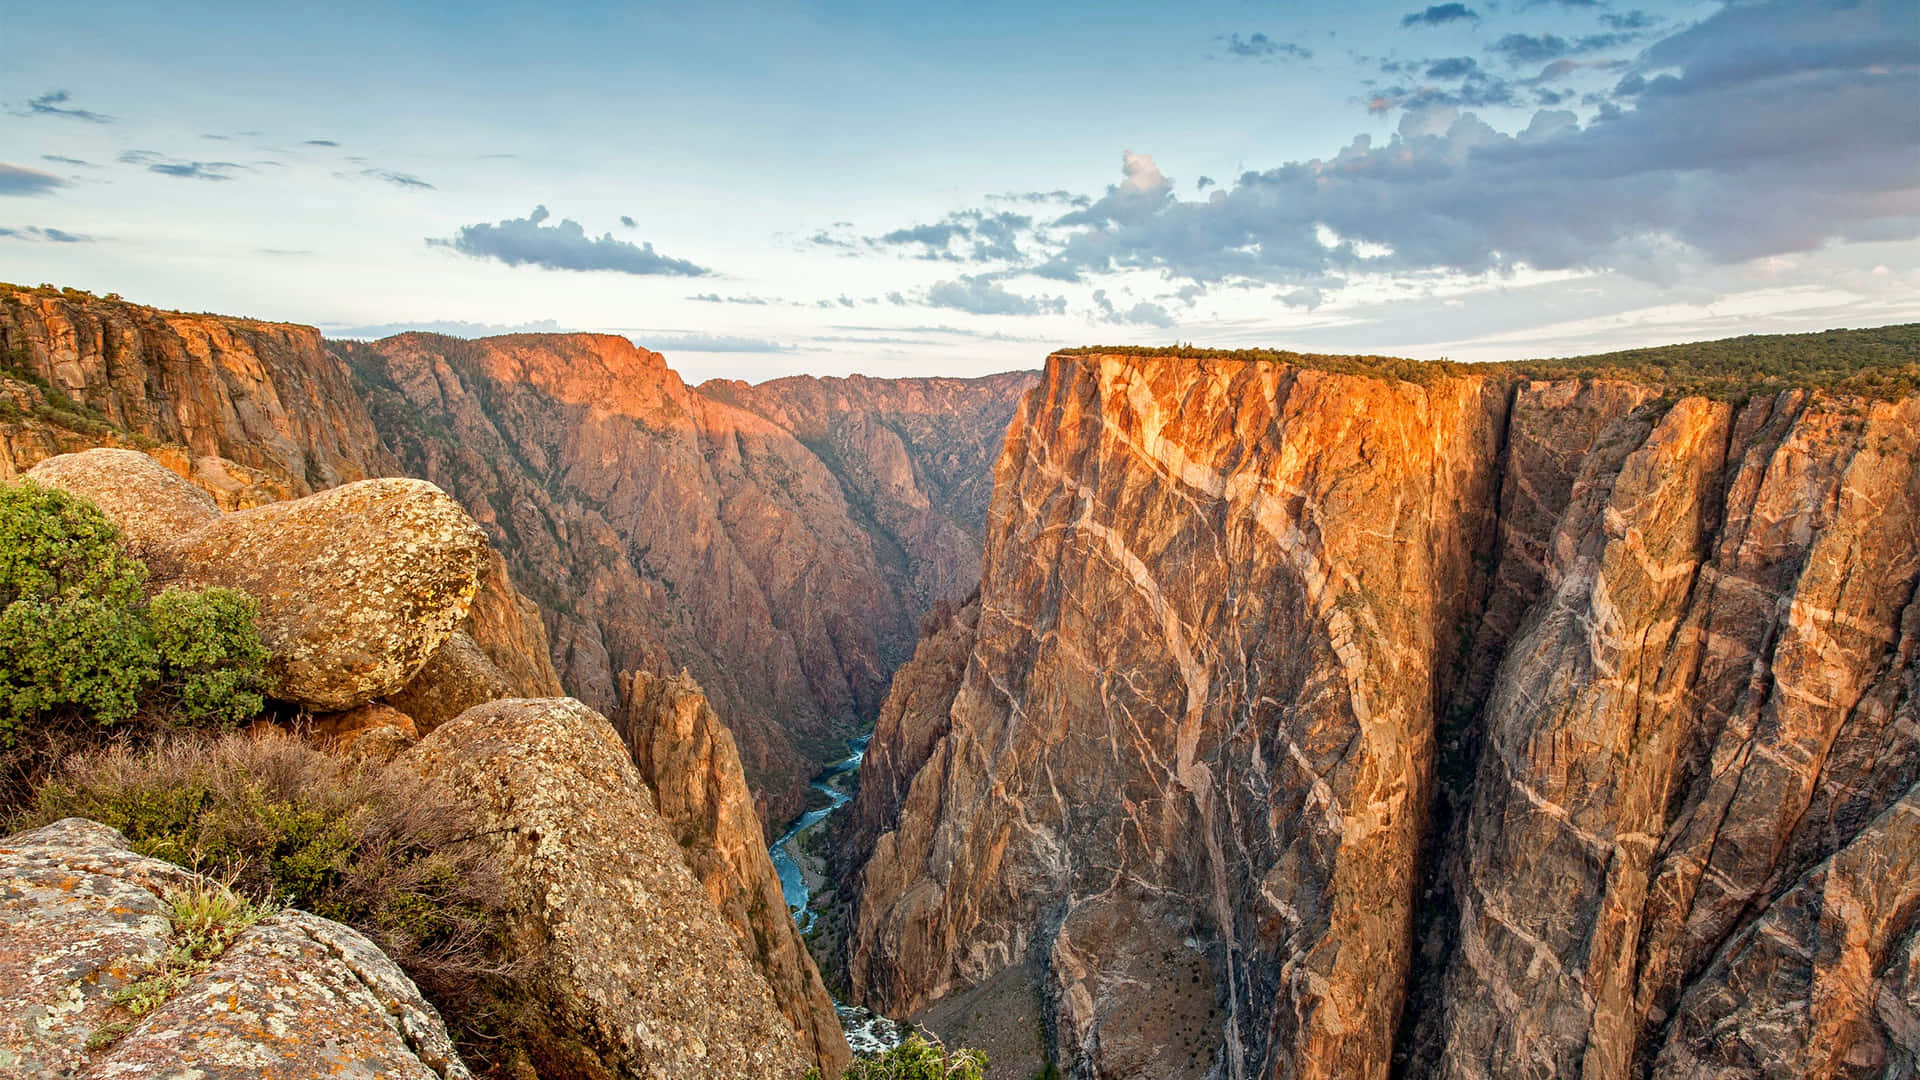 “Admire the majestic beauty of Black Canyon” Wallpaper